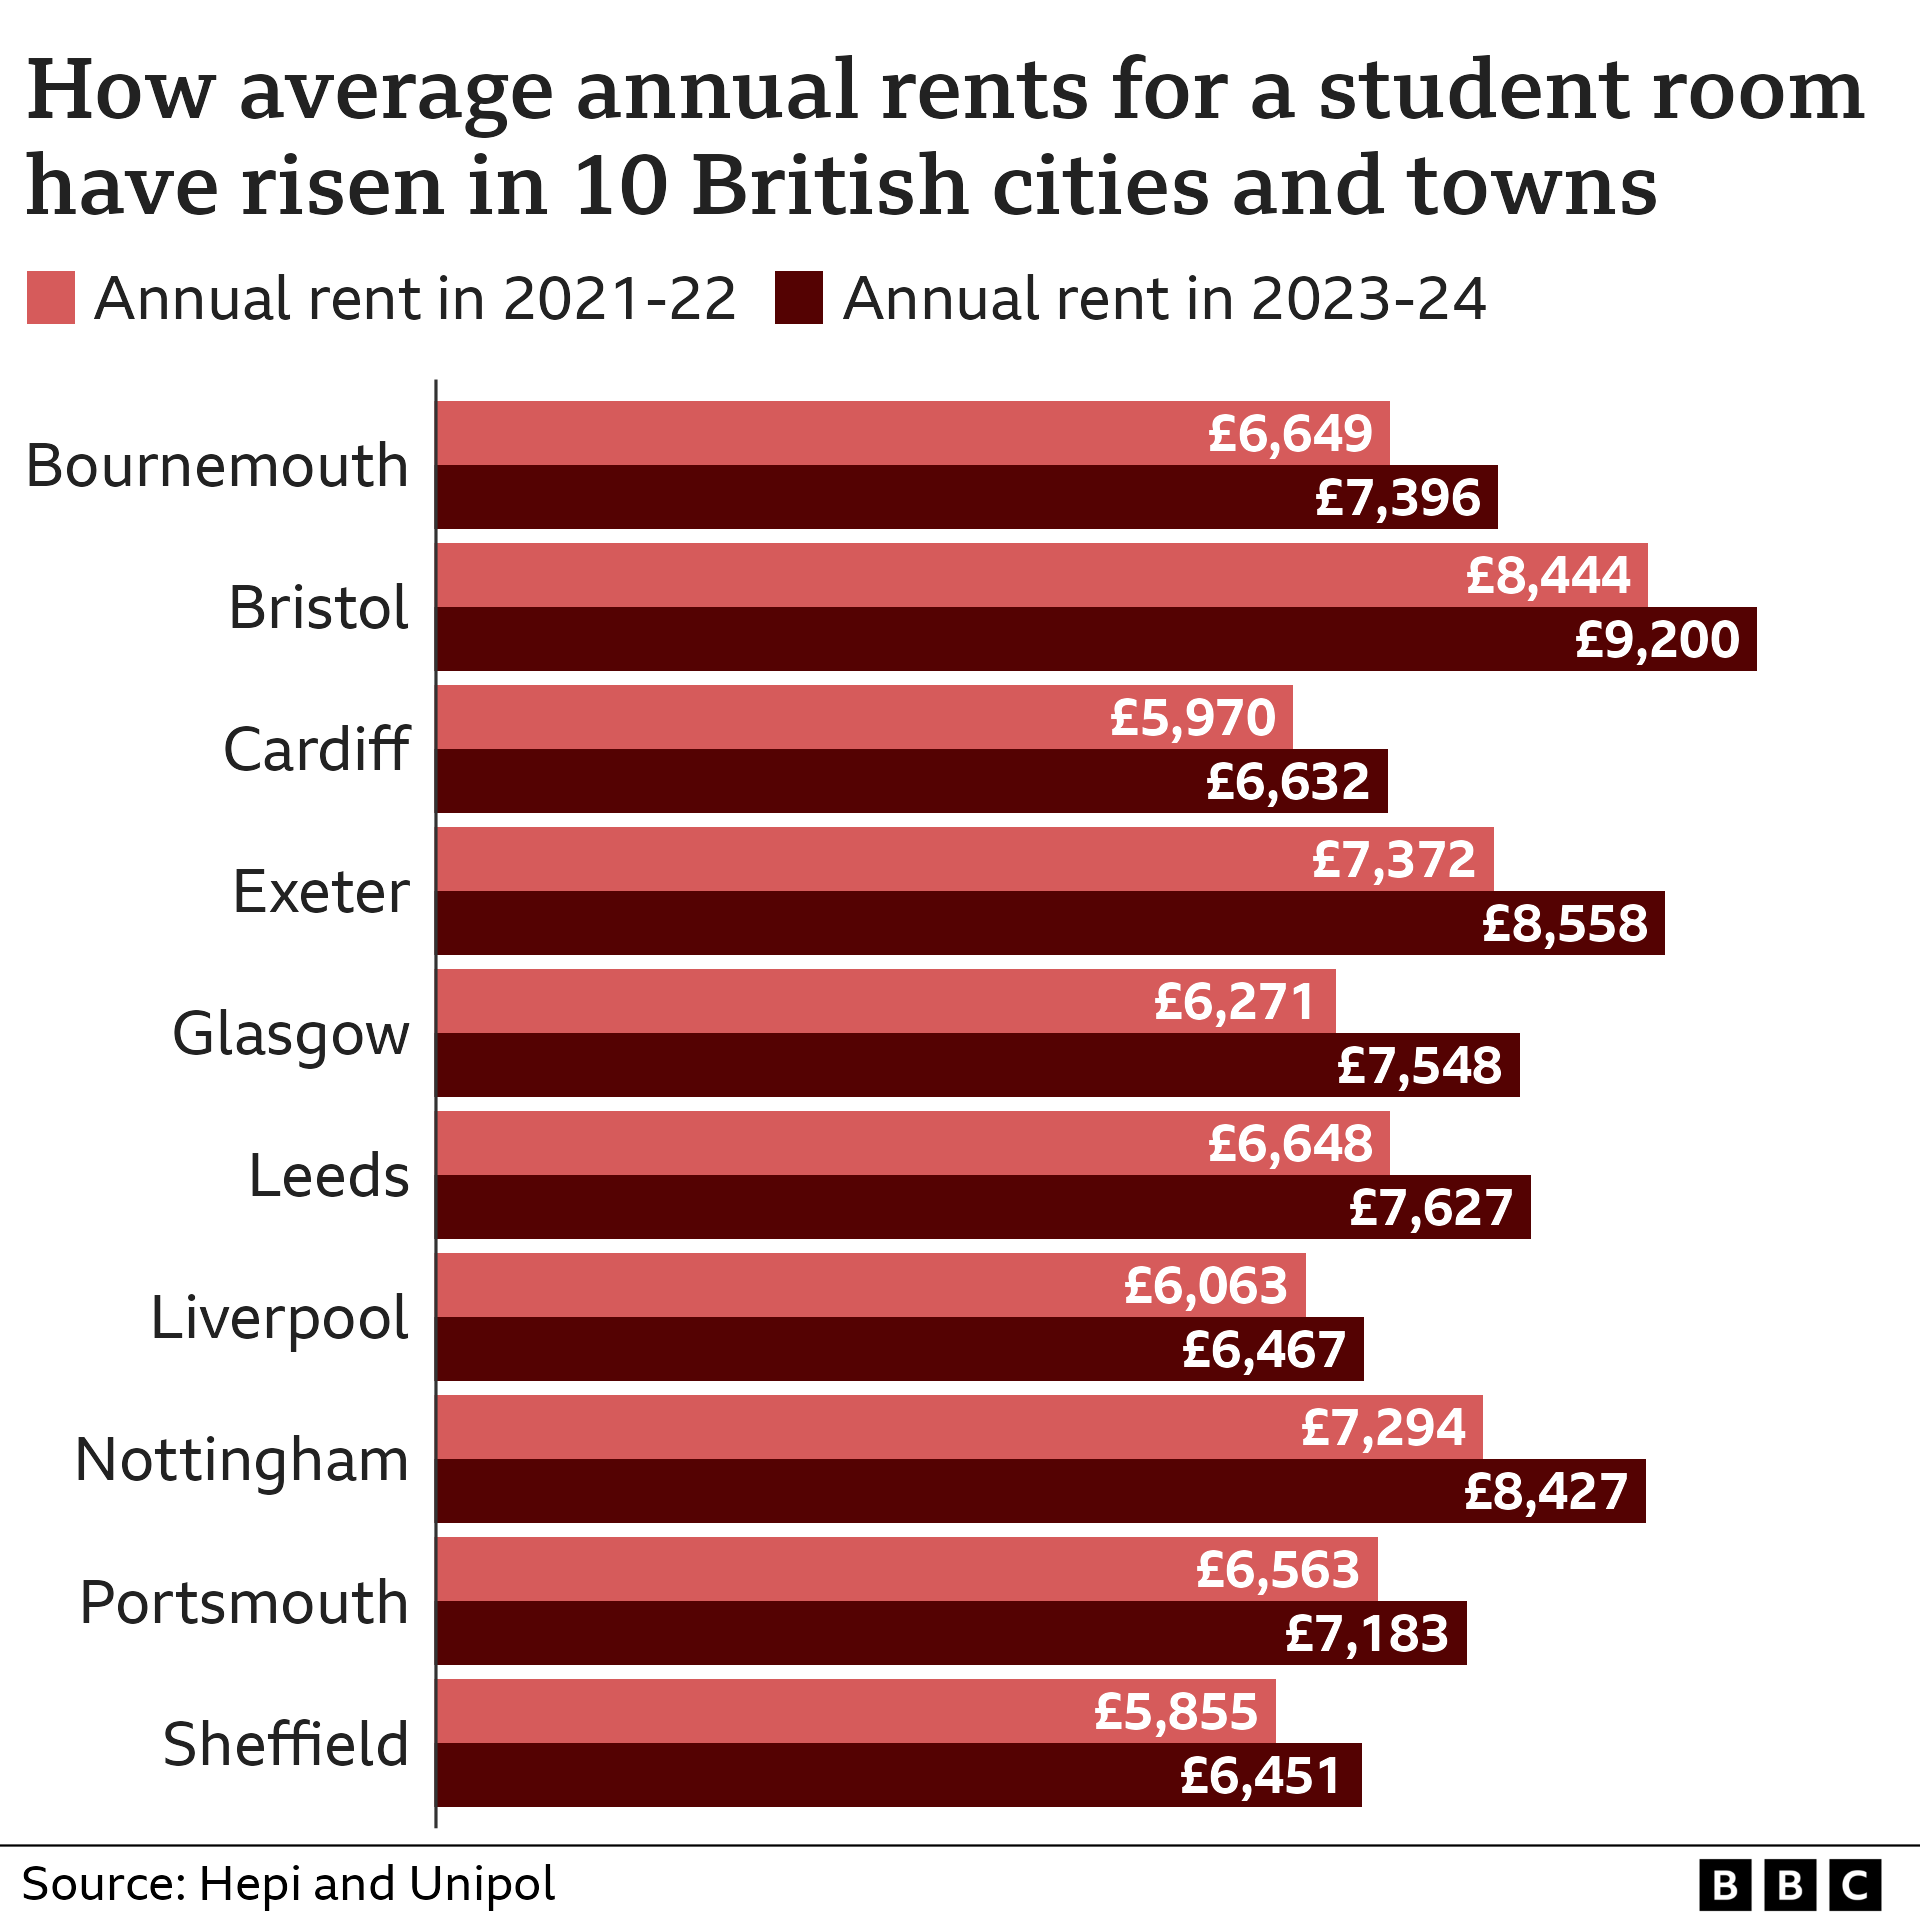 Chart showing how rents have risen in 10 British towns and cities - with the average annual rent for a student room in Bournemouth rising from £6,649 in 2021-22 to £7,396 in 2023-24, Bristol £8,444 to £9,200, Cardiff £5,970 to £6,632, Exeter £7,372 to £8,558, Glasgow £6,271 to £7,548, Leeds £6,648 to £7,627, Liverpool £6,063 to £6,467, Nottingham £7,294 to £8,427, Portsmouth £6,563 to £7,183 and Sheffield £5,855 to £6,451